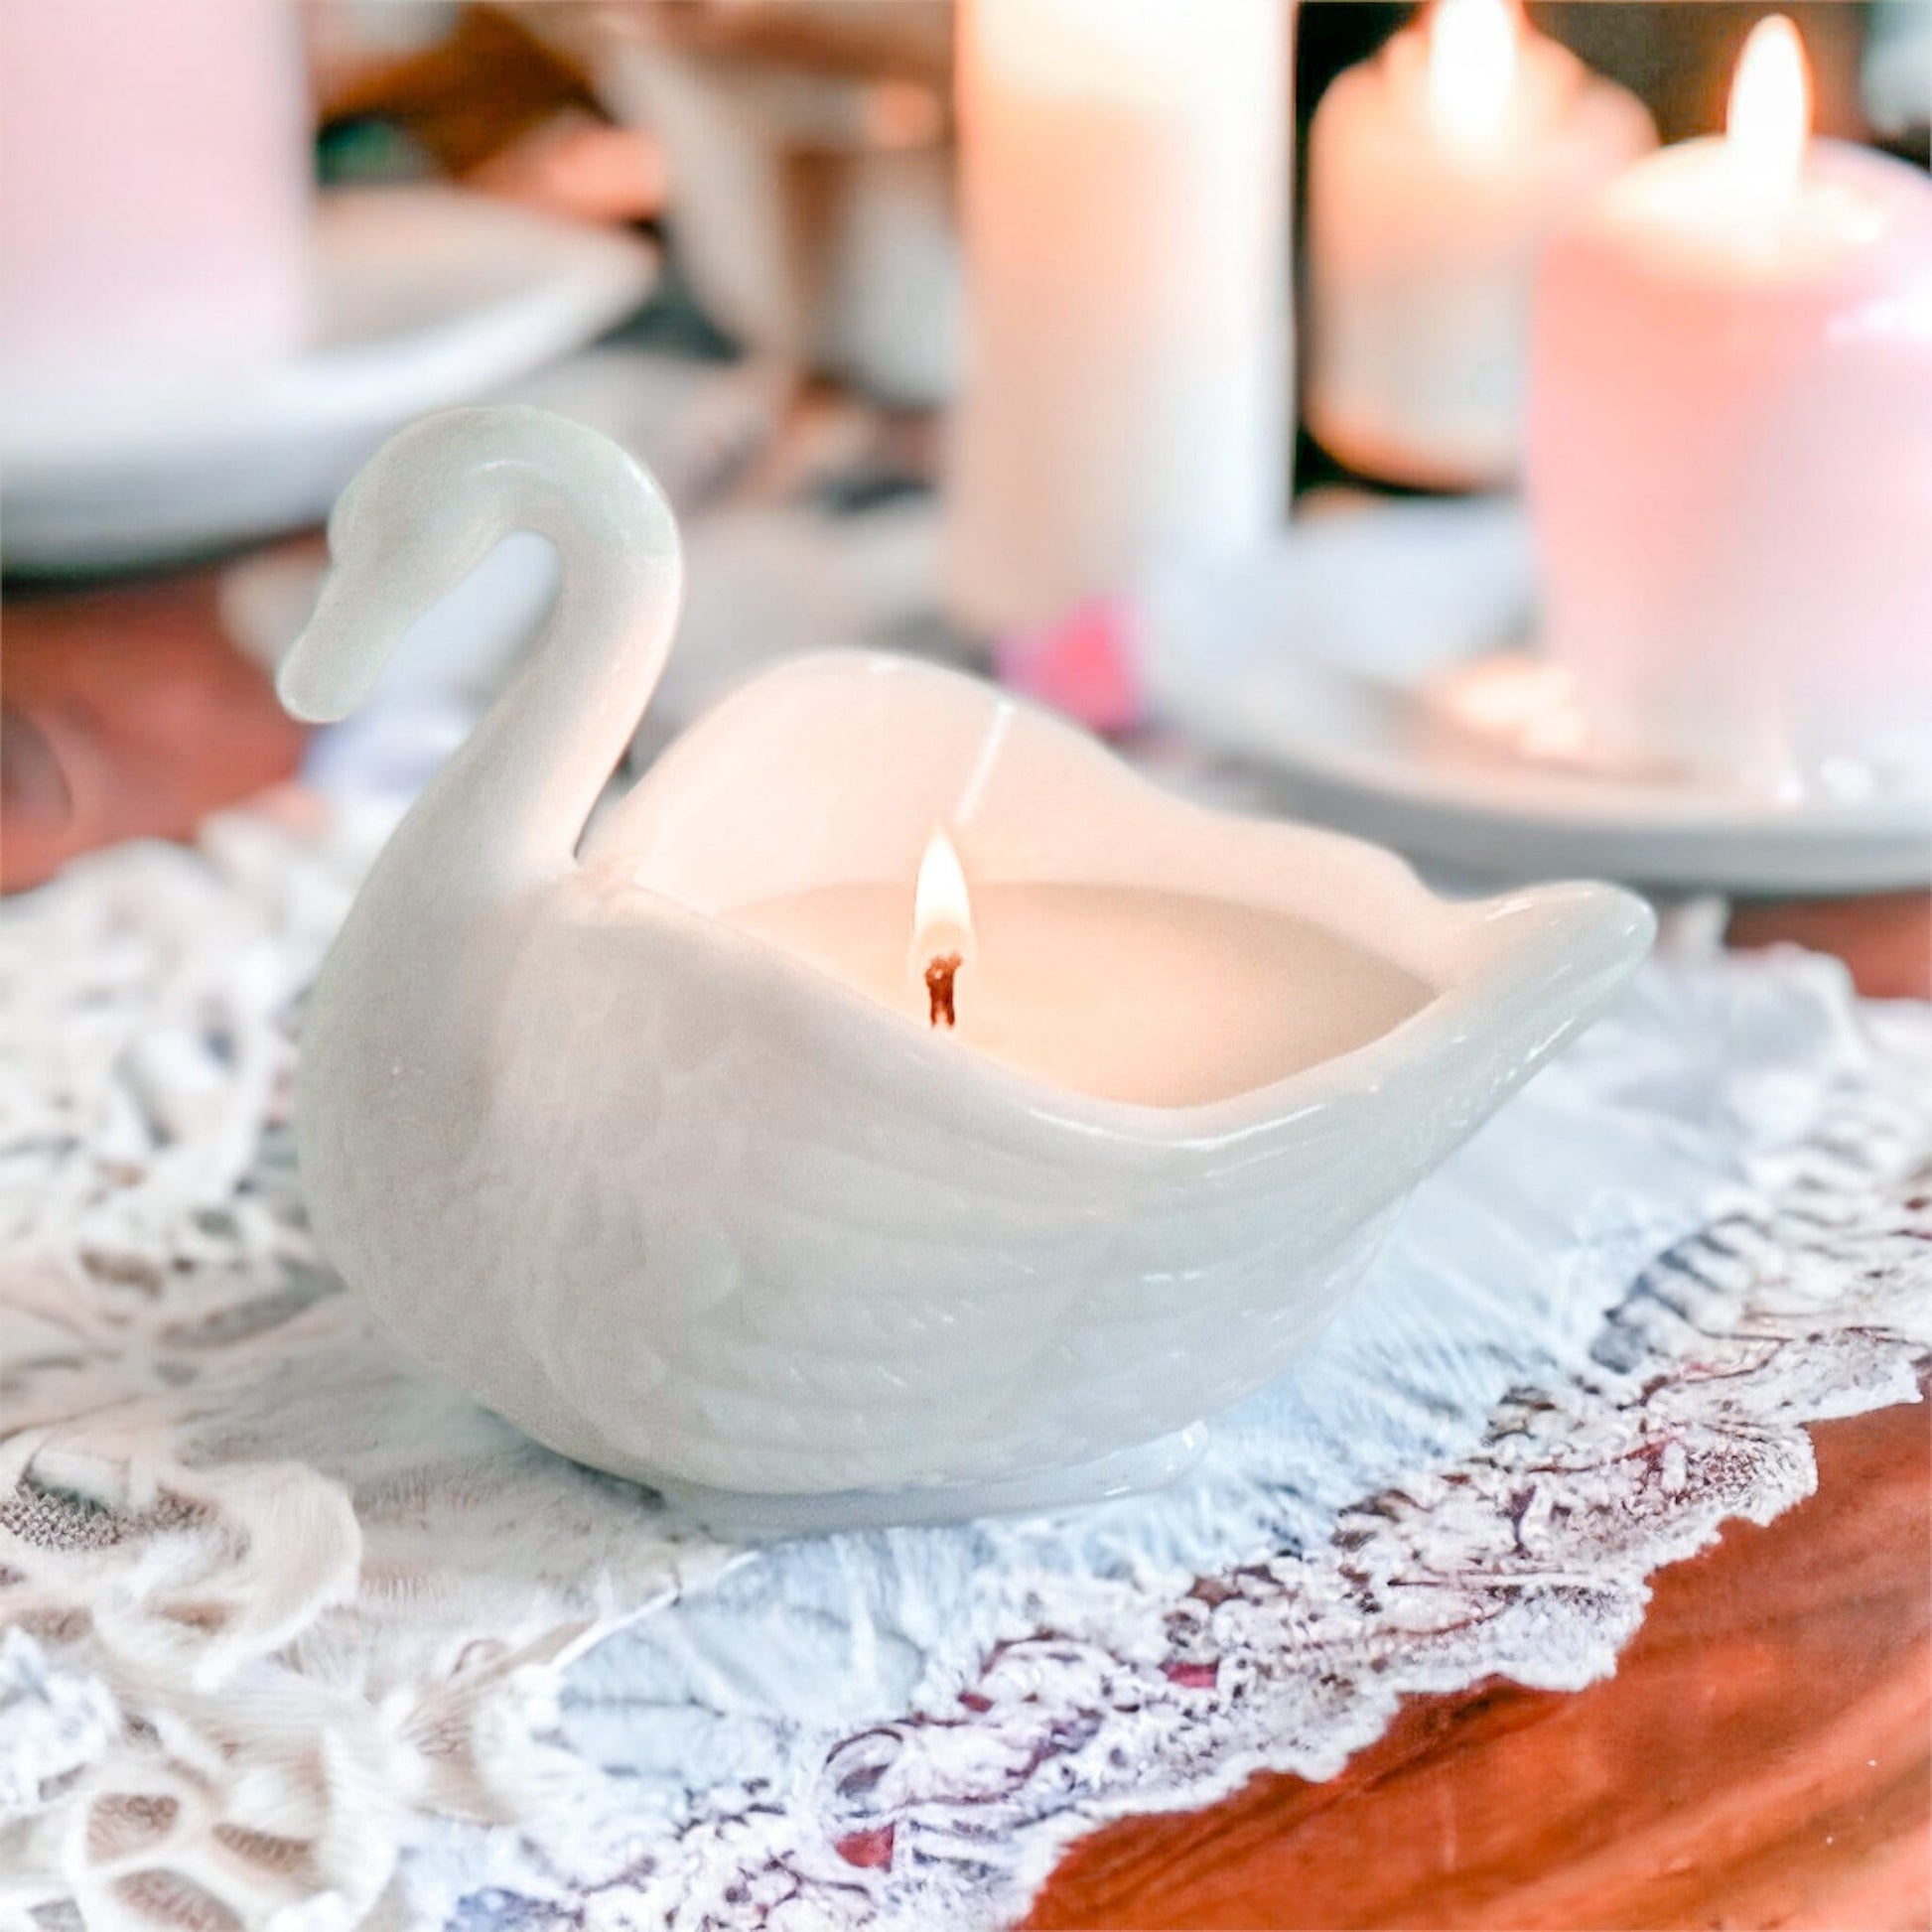 Moonflower Scented Candle in Vintage Milk Glass Swan Dish